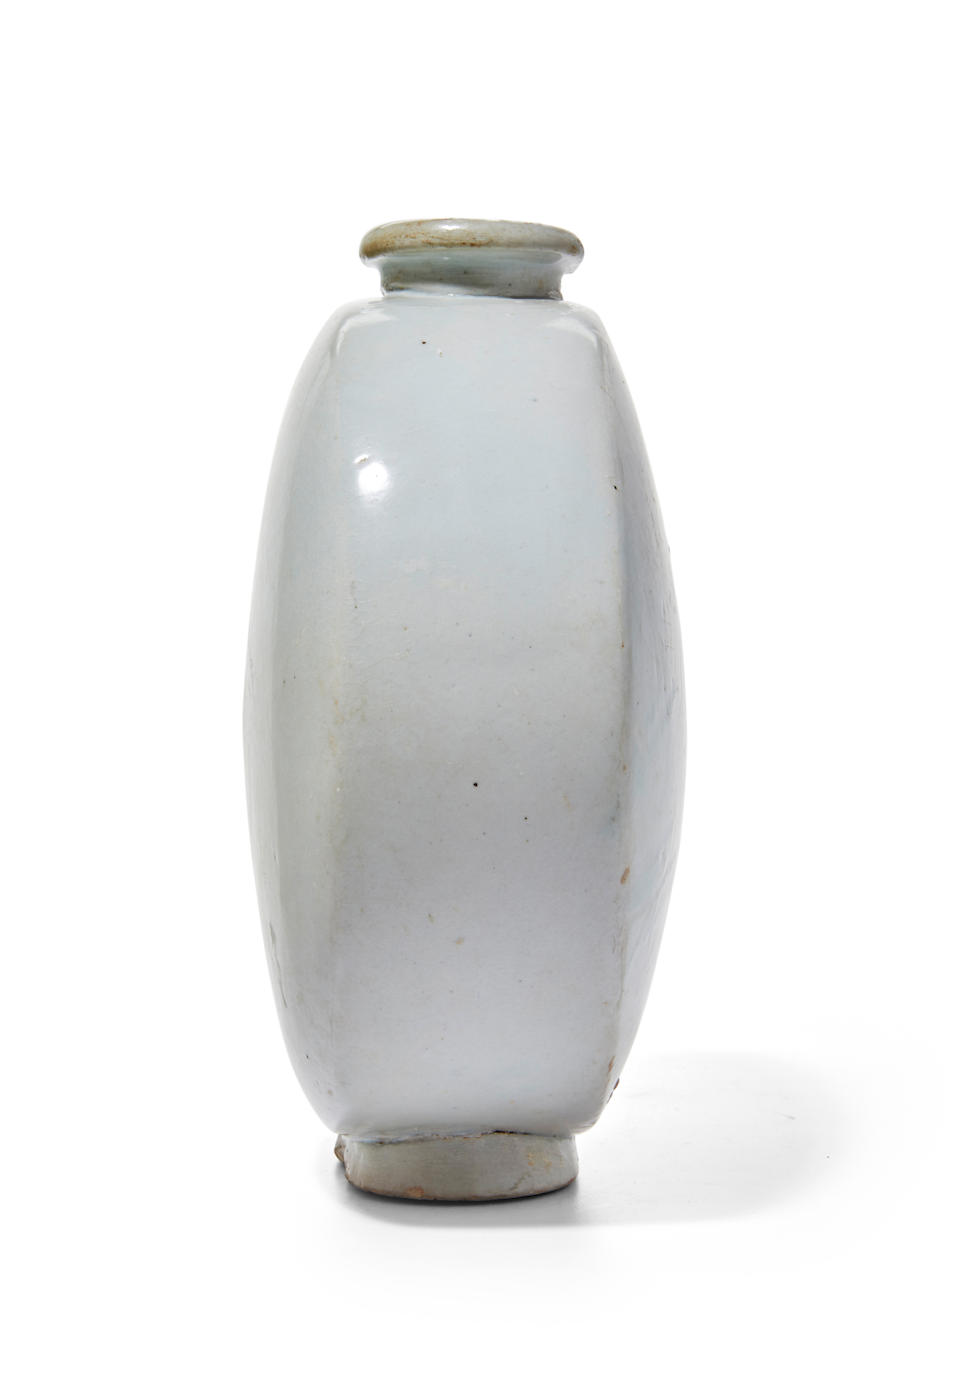 A large and fine porcelain Moon Flask Joseon dynasty (1392-1897), 16th/17th century